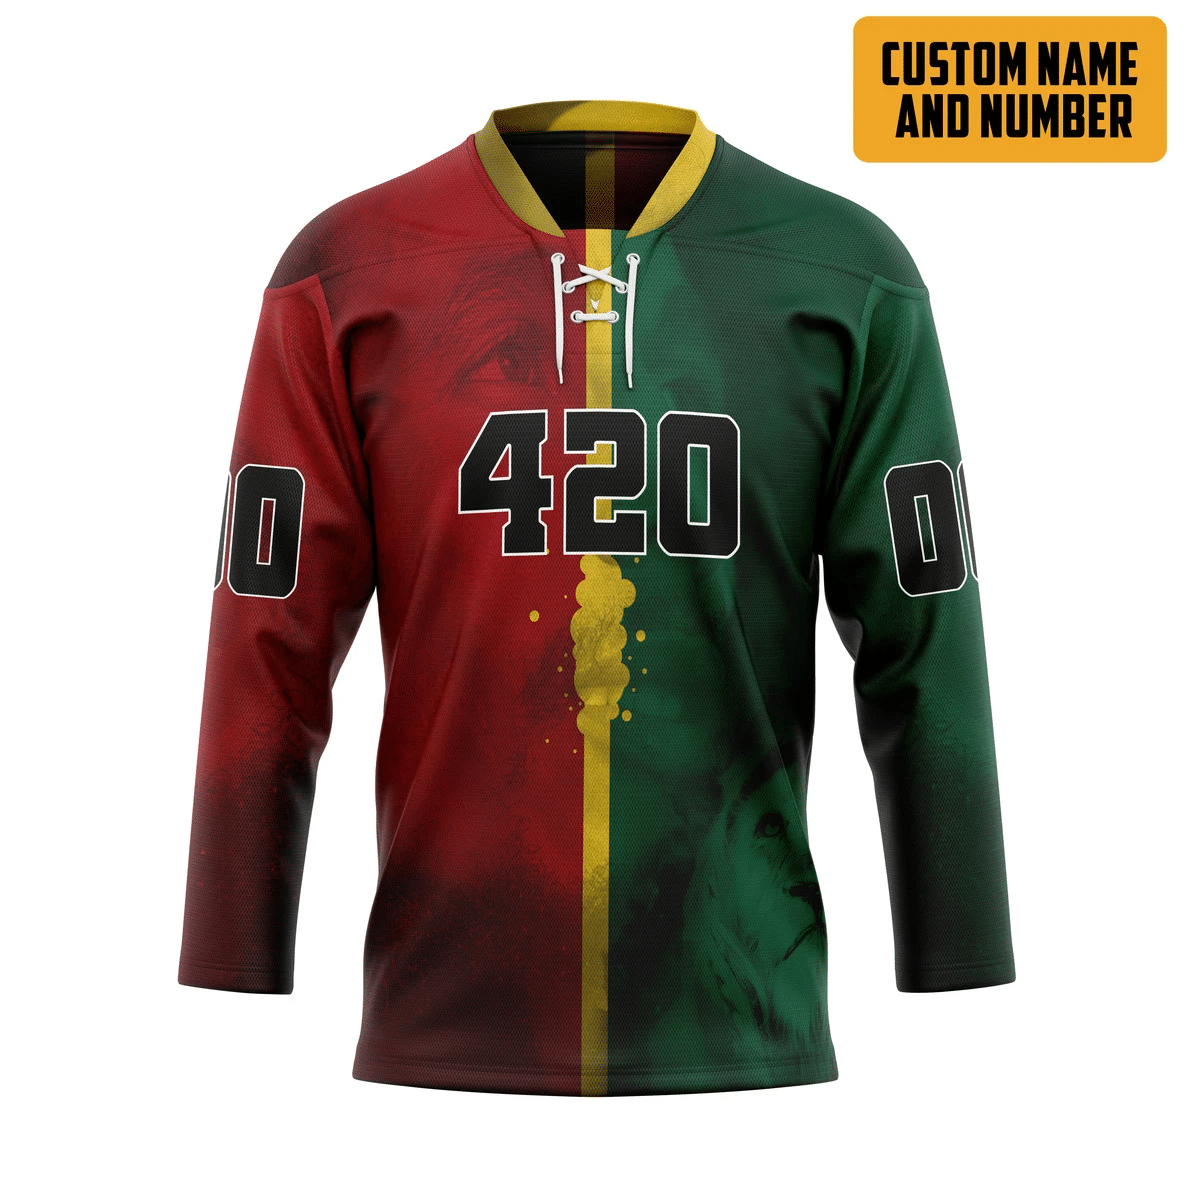 Choosing a hockey jersey is not as difficult as you think. 55